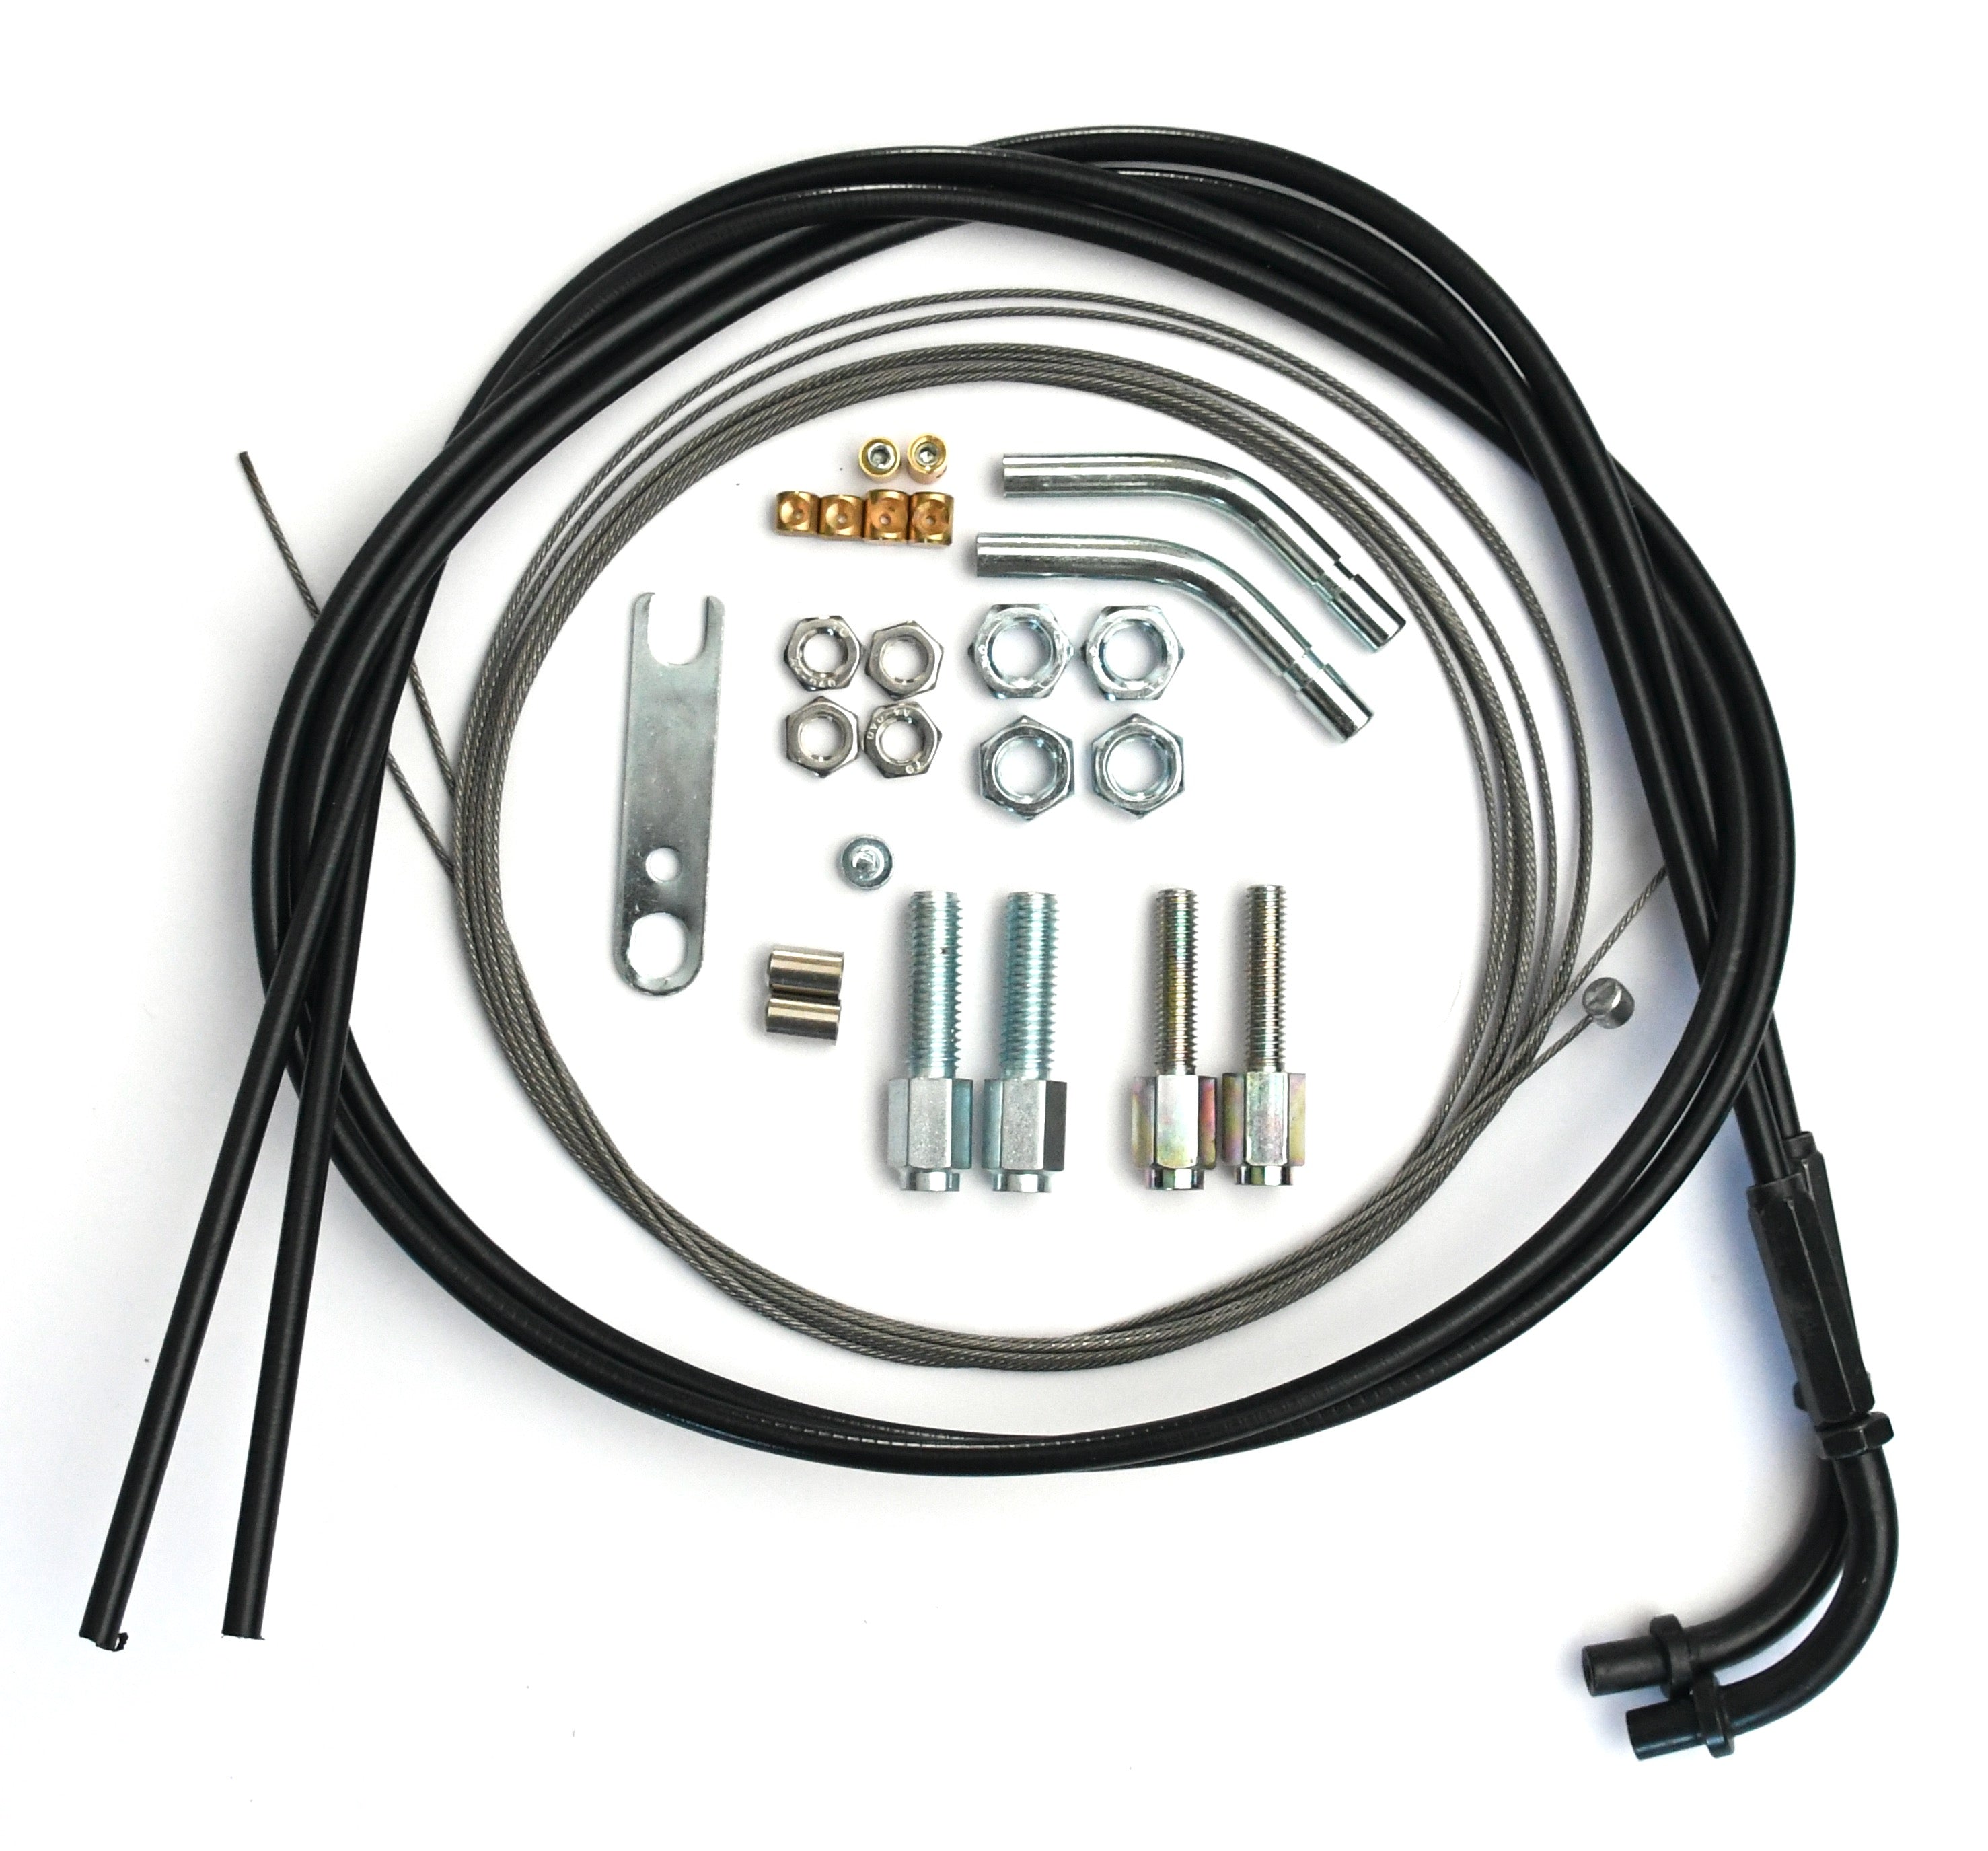 Venhill Universal Throttle Cable Kit for Domino XM2 Throttle 2M - 0